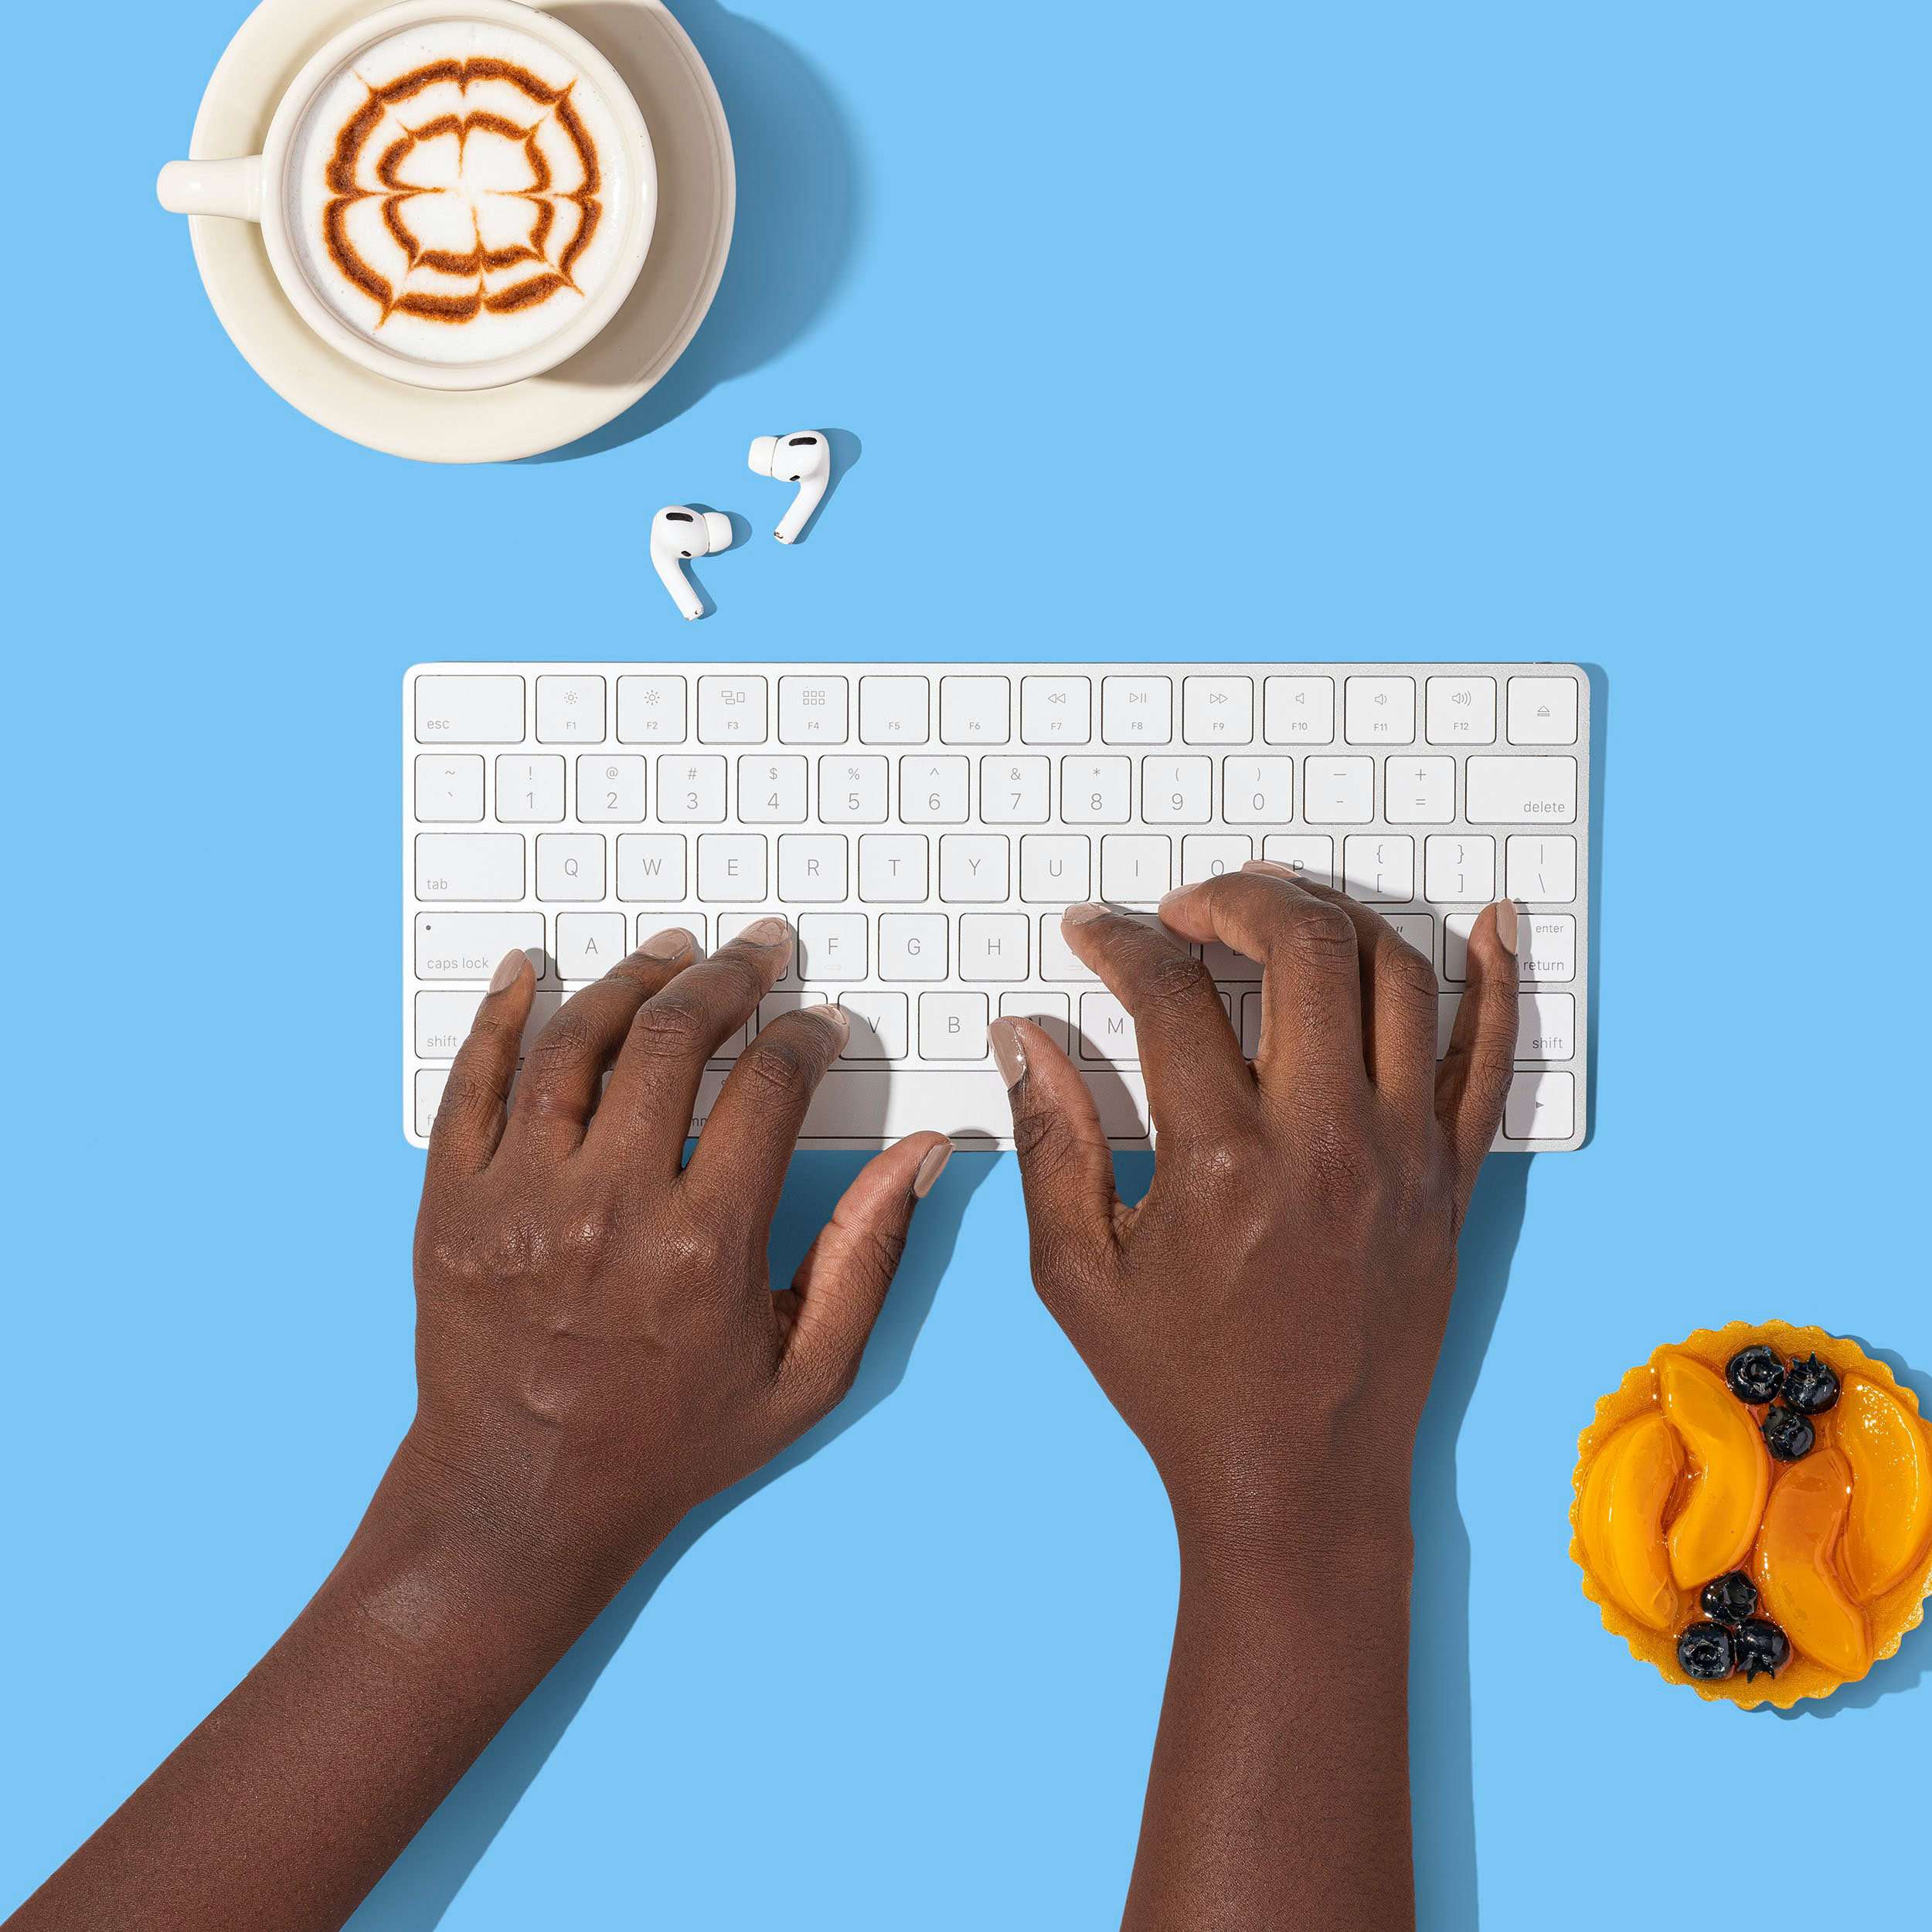 A young black woman's hands typing on a white keyboard, set on a blue background, with a cappuccino and a fruit tart nearby